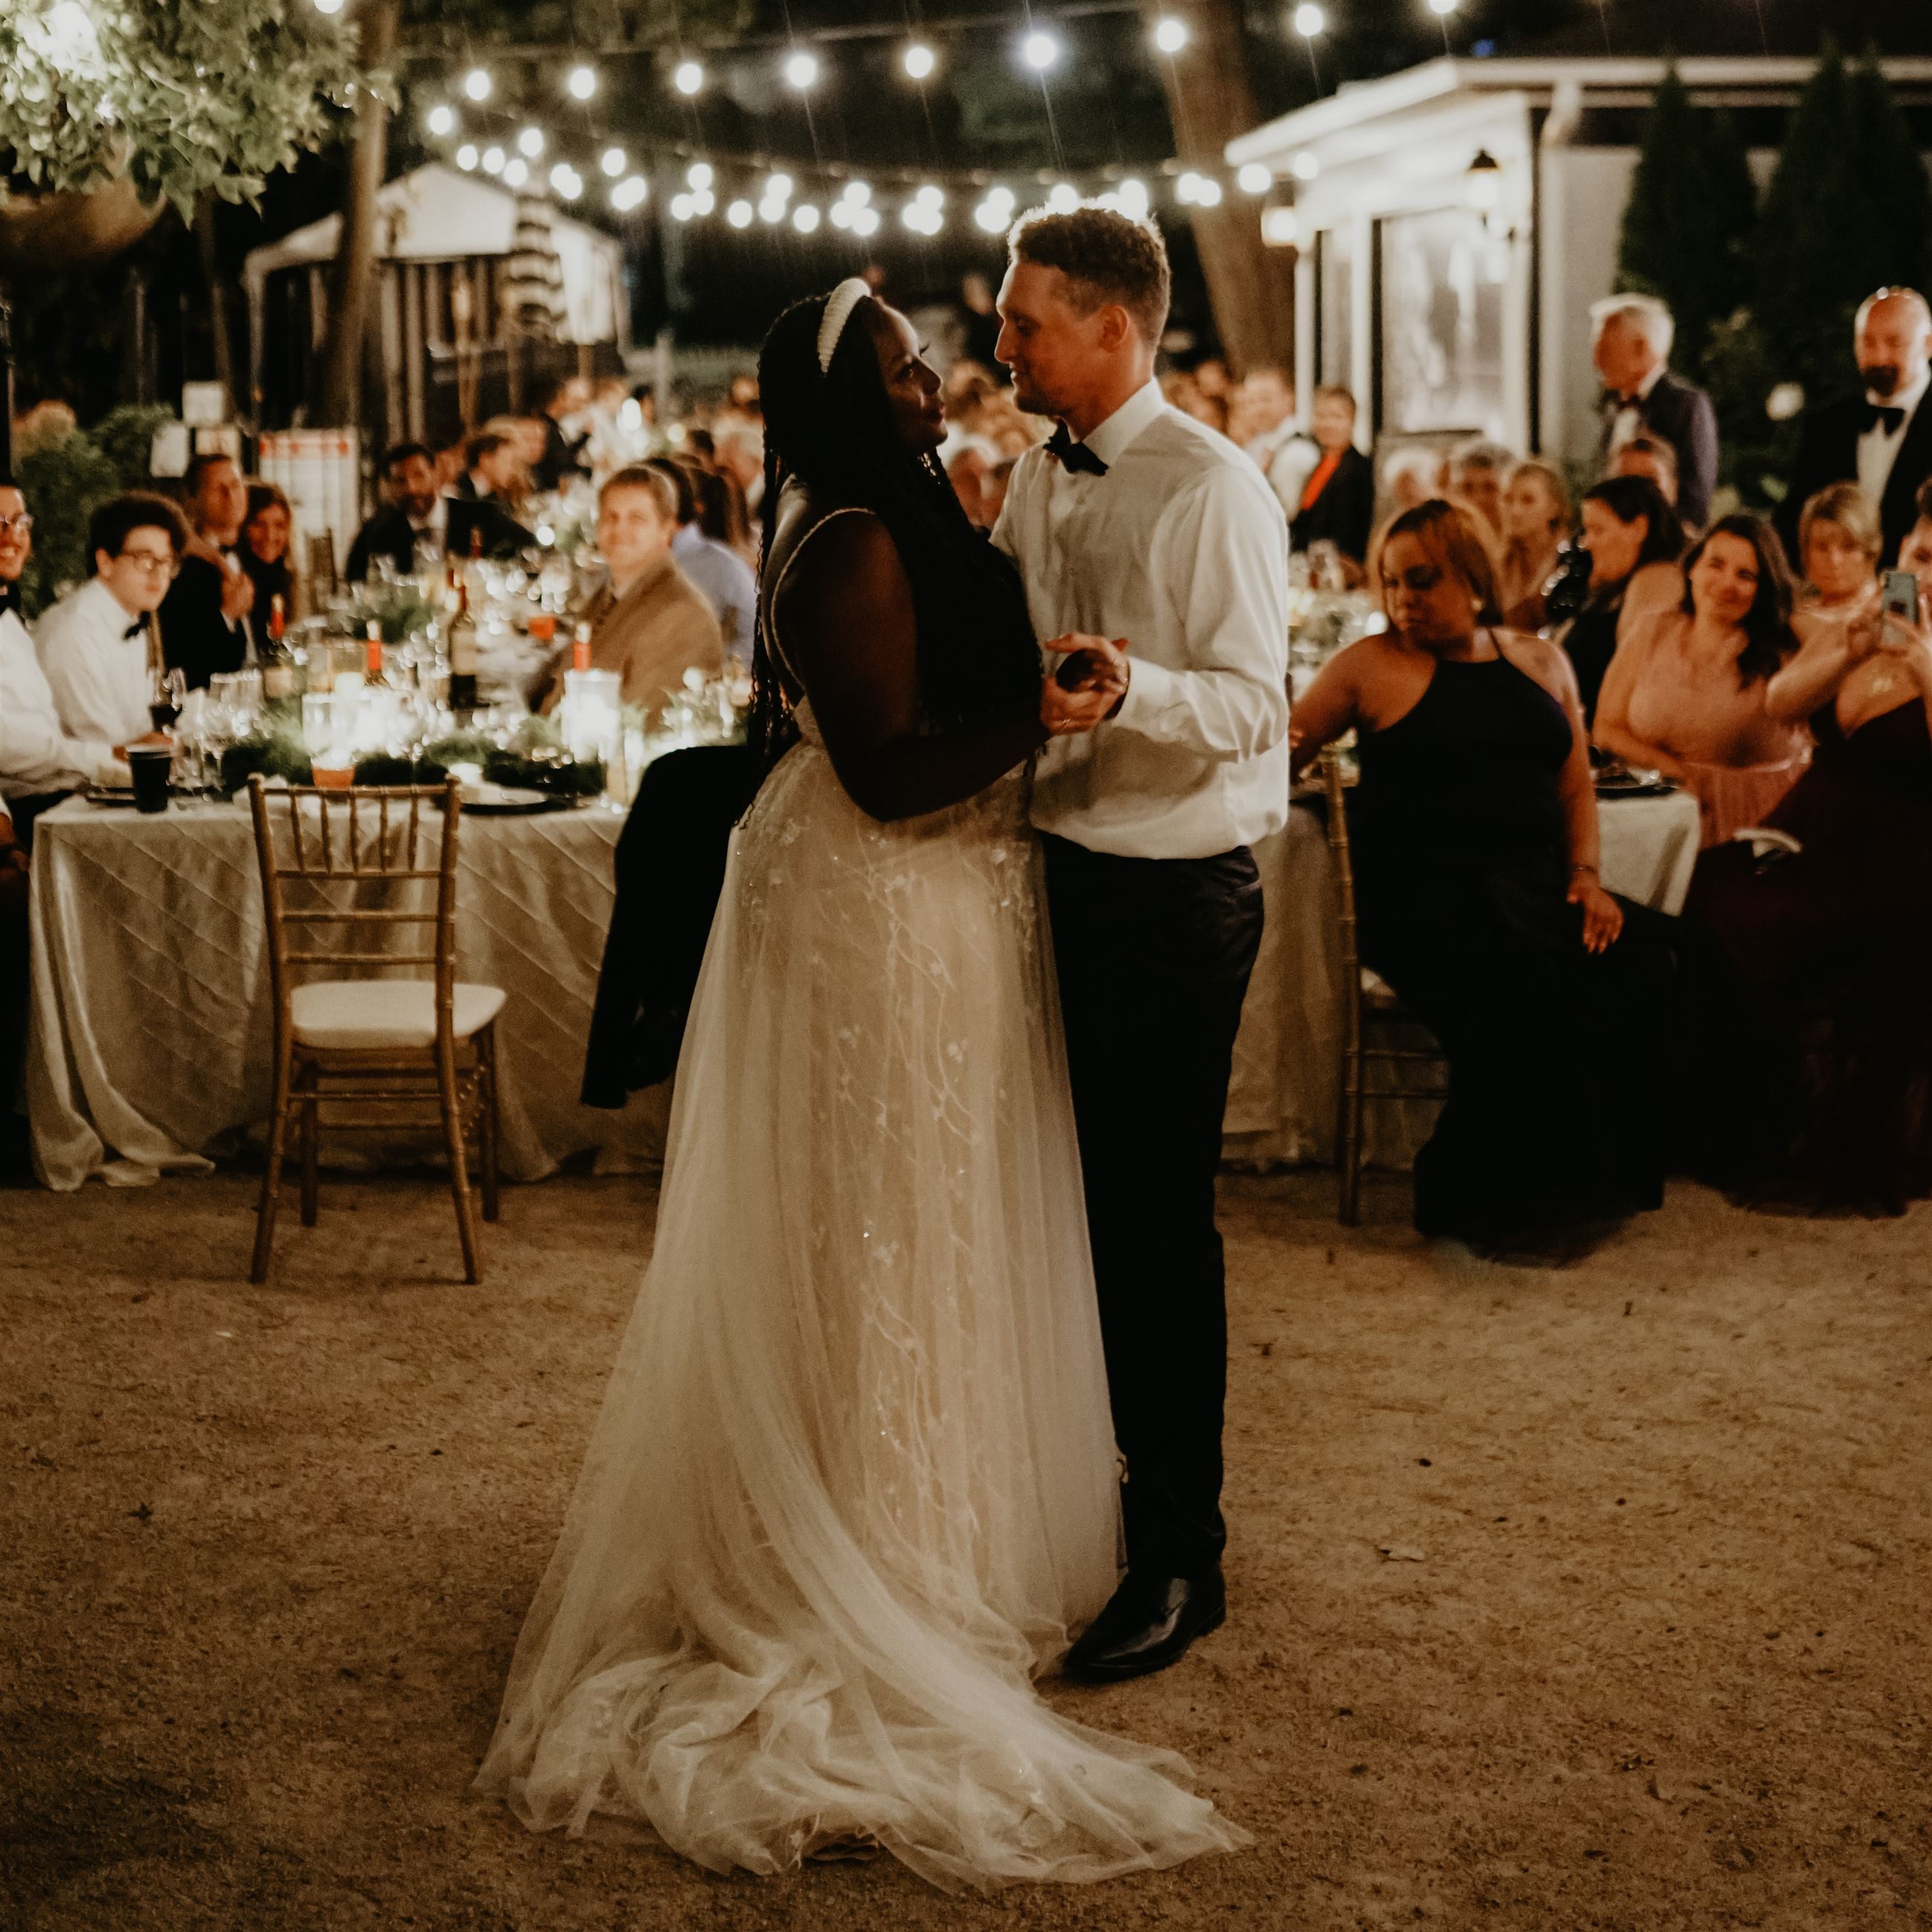 Bride and groom dancing together after their wedding reception